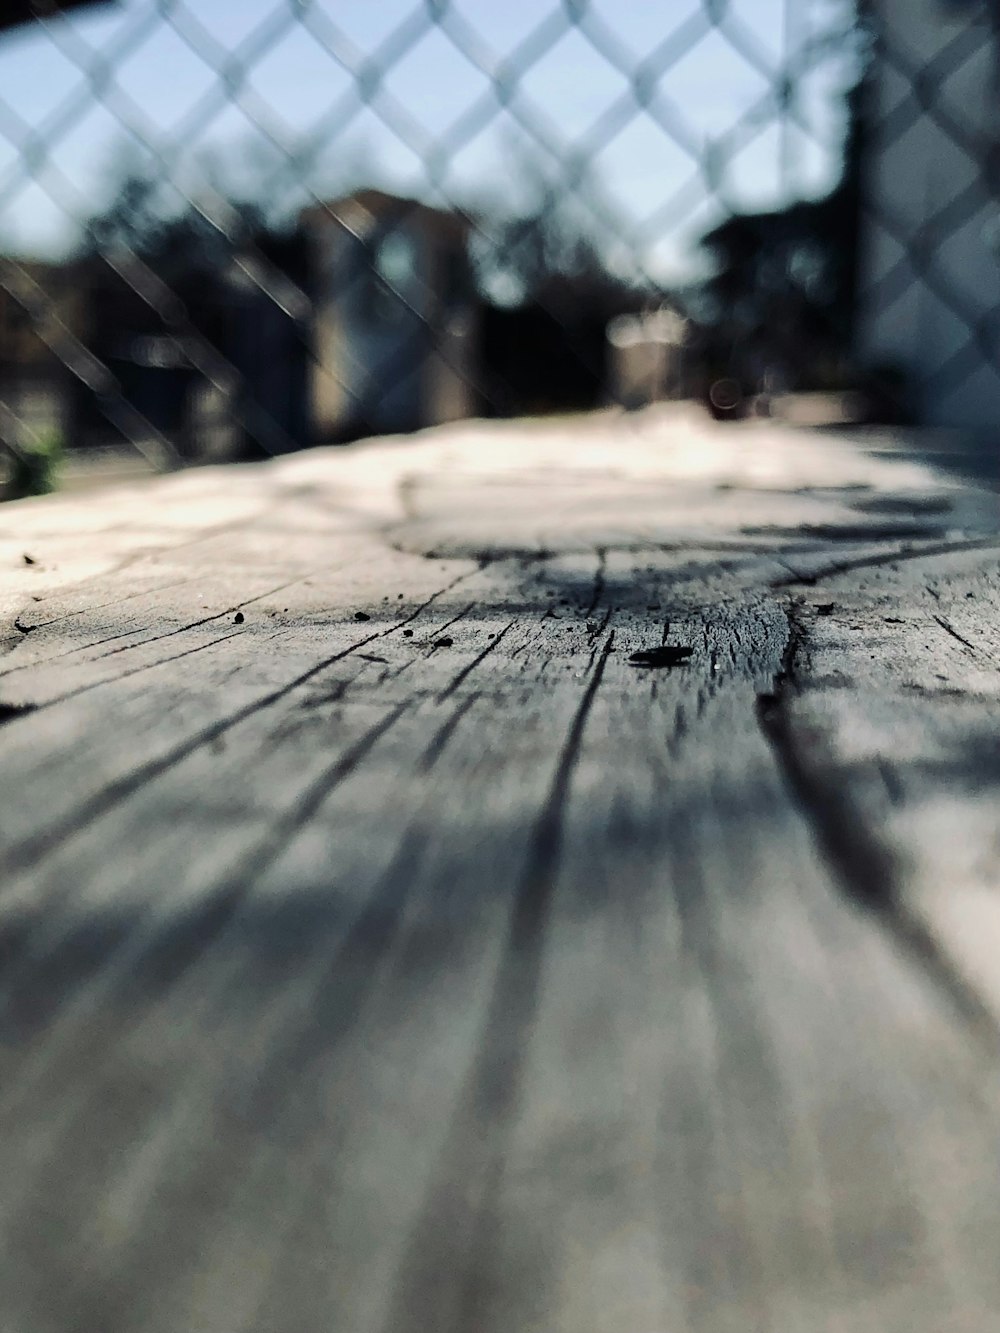 a wooden table with a chain link fence in the background